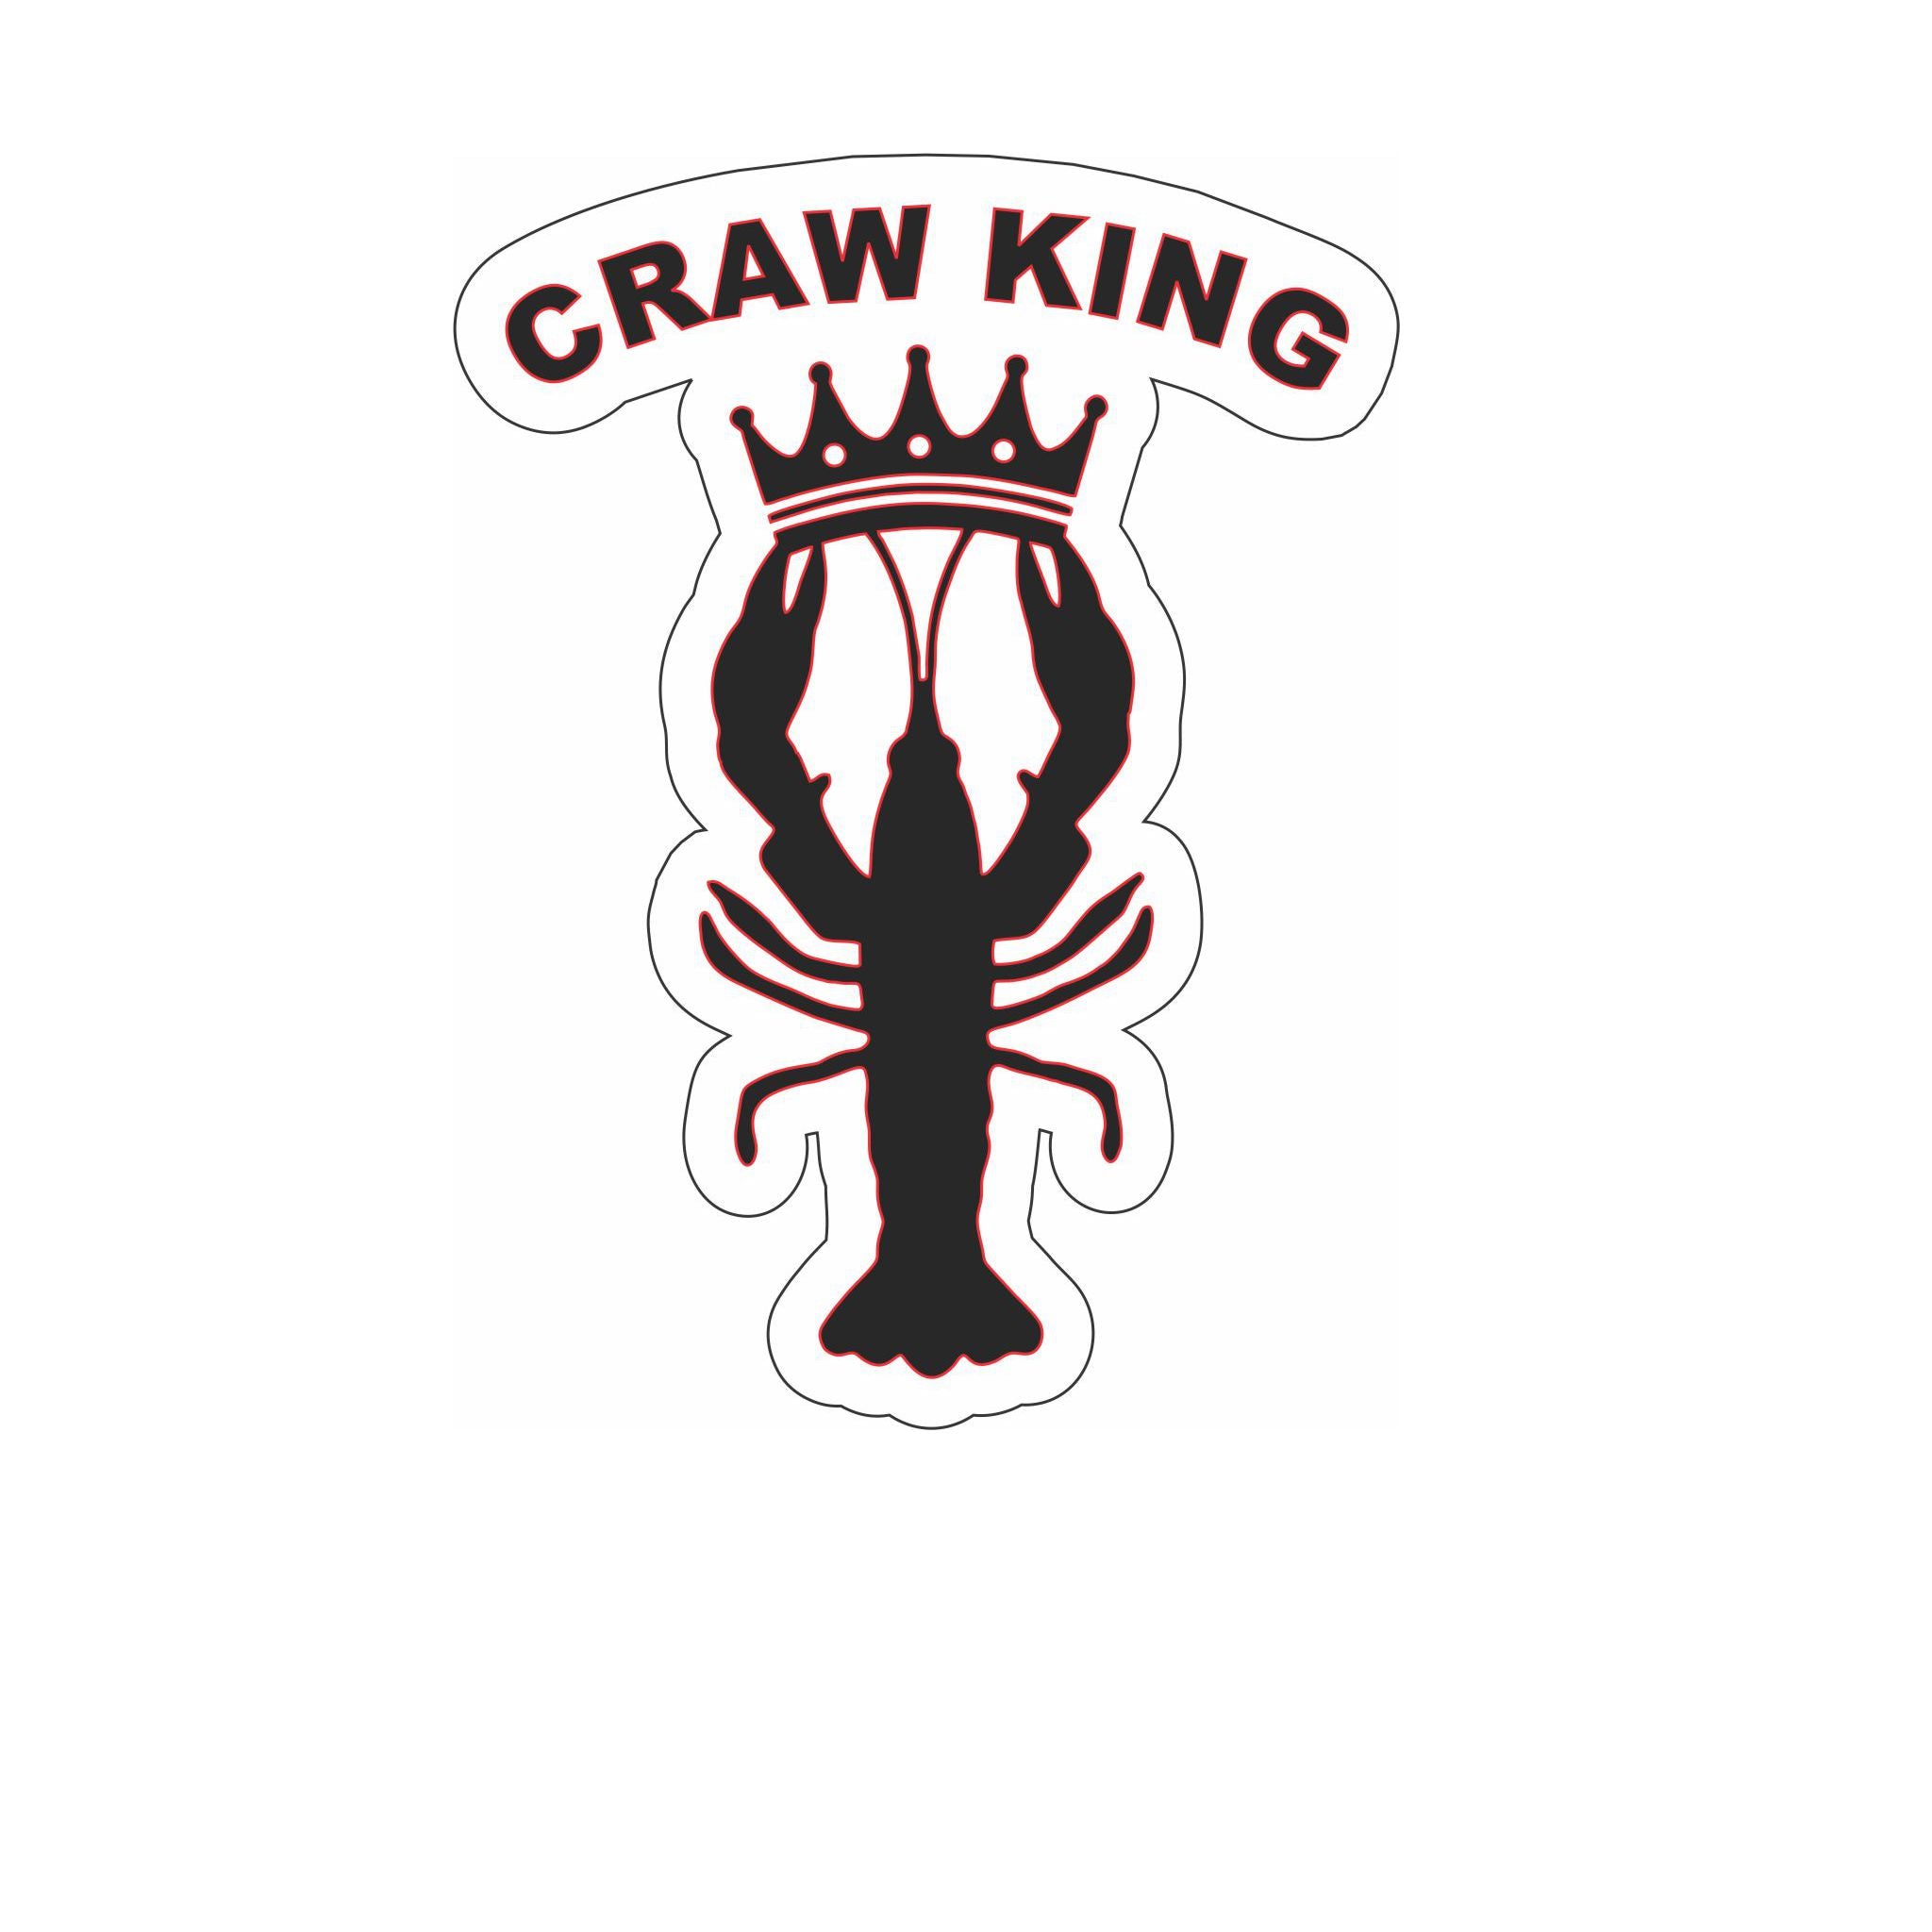 Craw King Printed Decal - Black/Red Outline Stylish Accessory